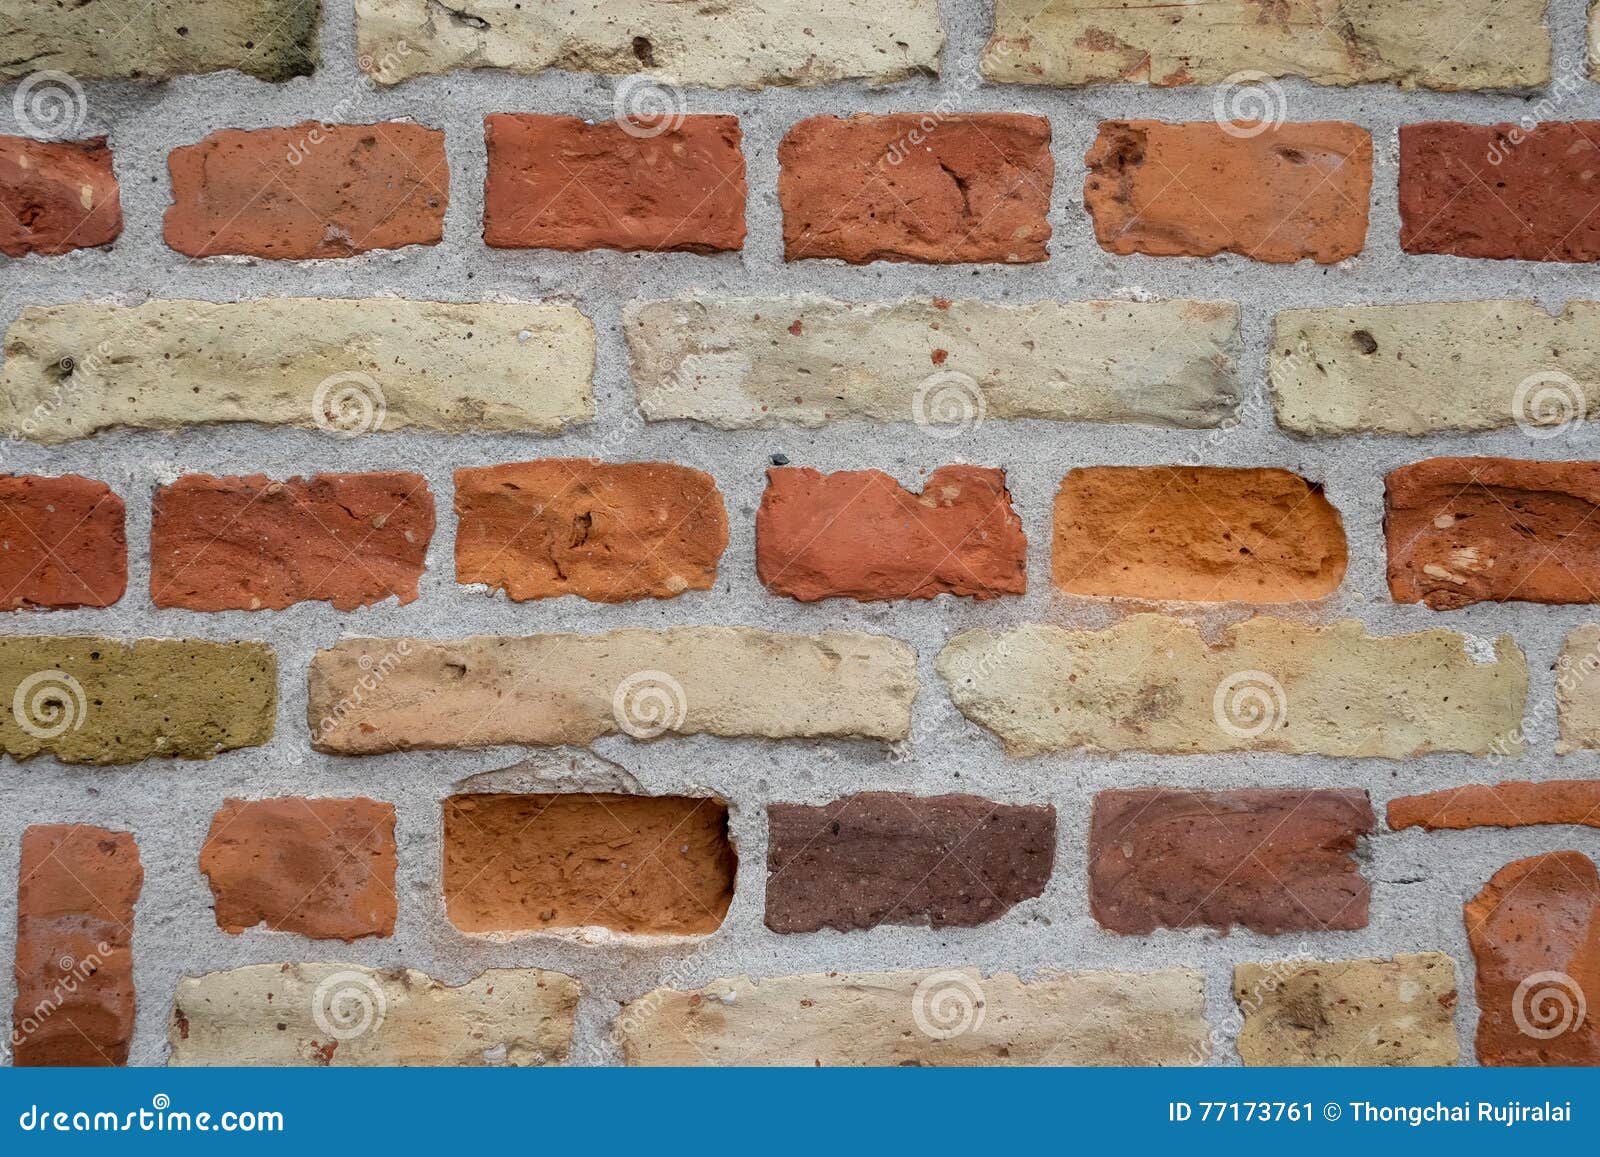 Orange Brick Wall Stock Image Image Of Urban Backdrop 77173761 Normal mode strict mode list all children. orange brick wall stock image image of urban backdrop 77173761